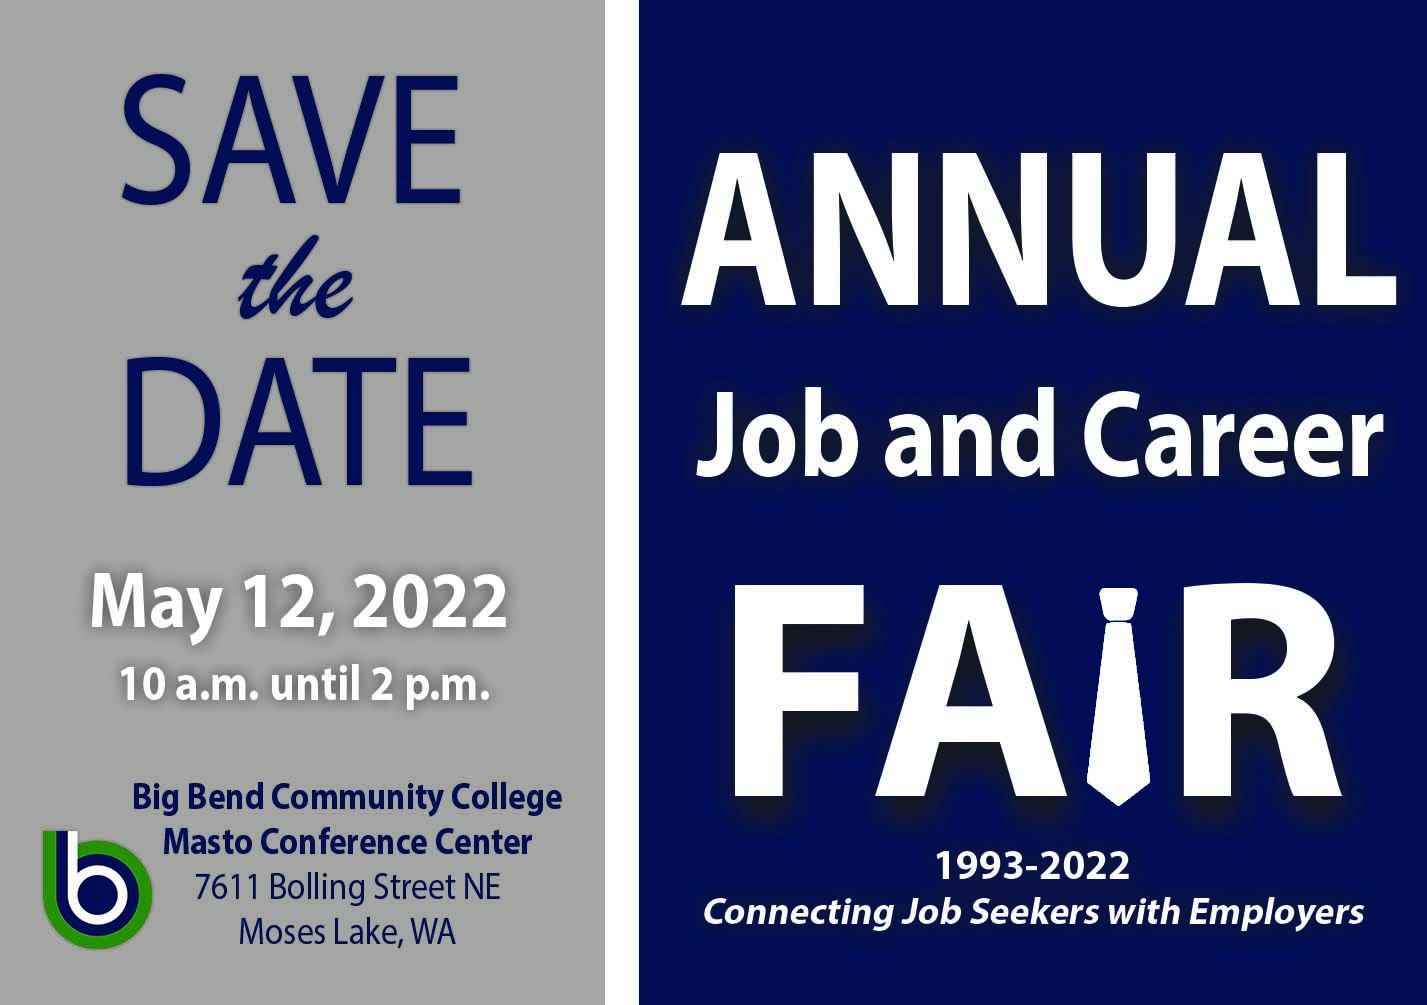 Save the Date Card Job and Career Fair May 12, 2022